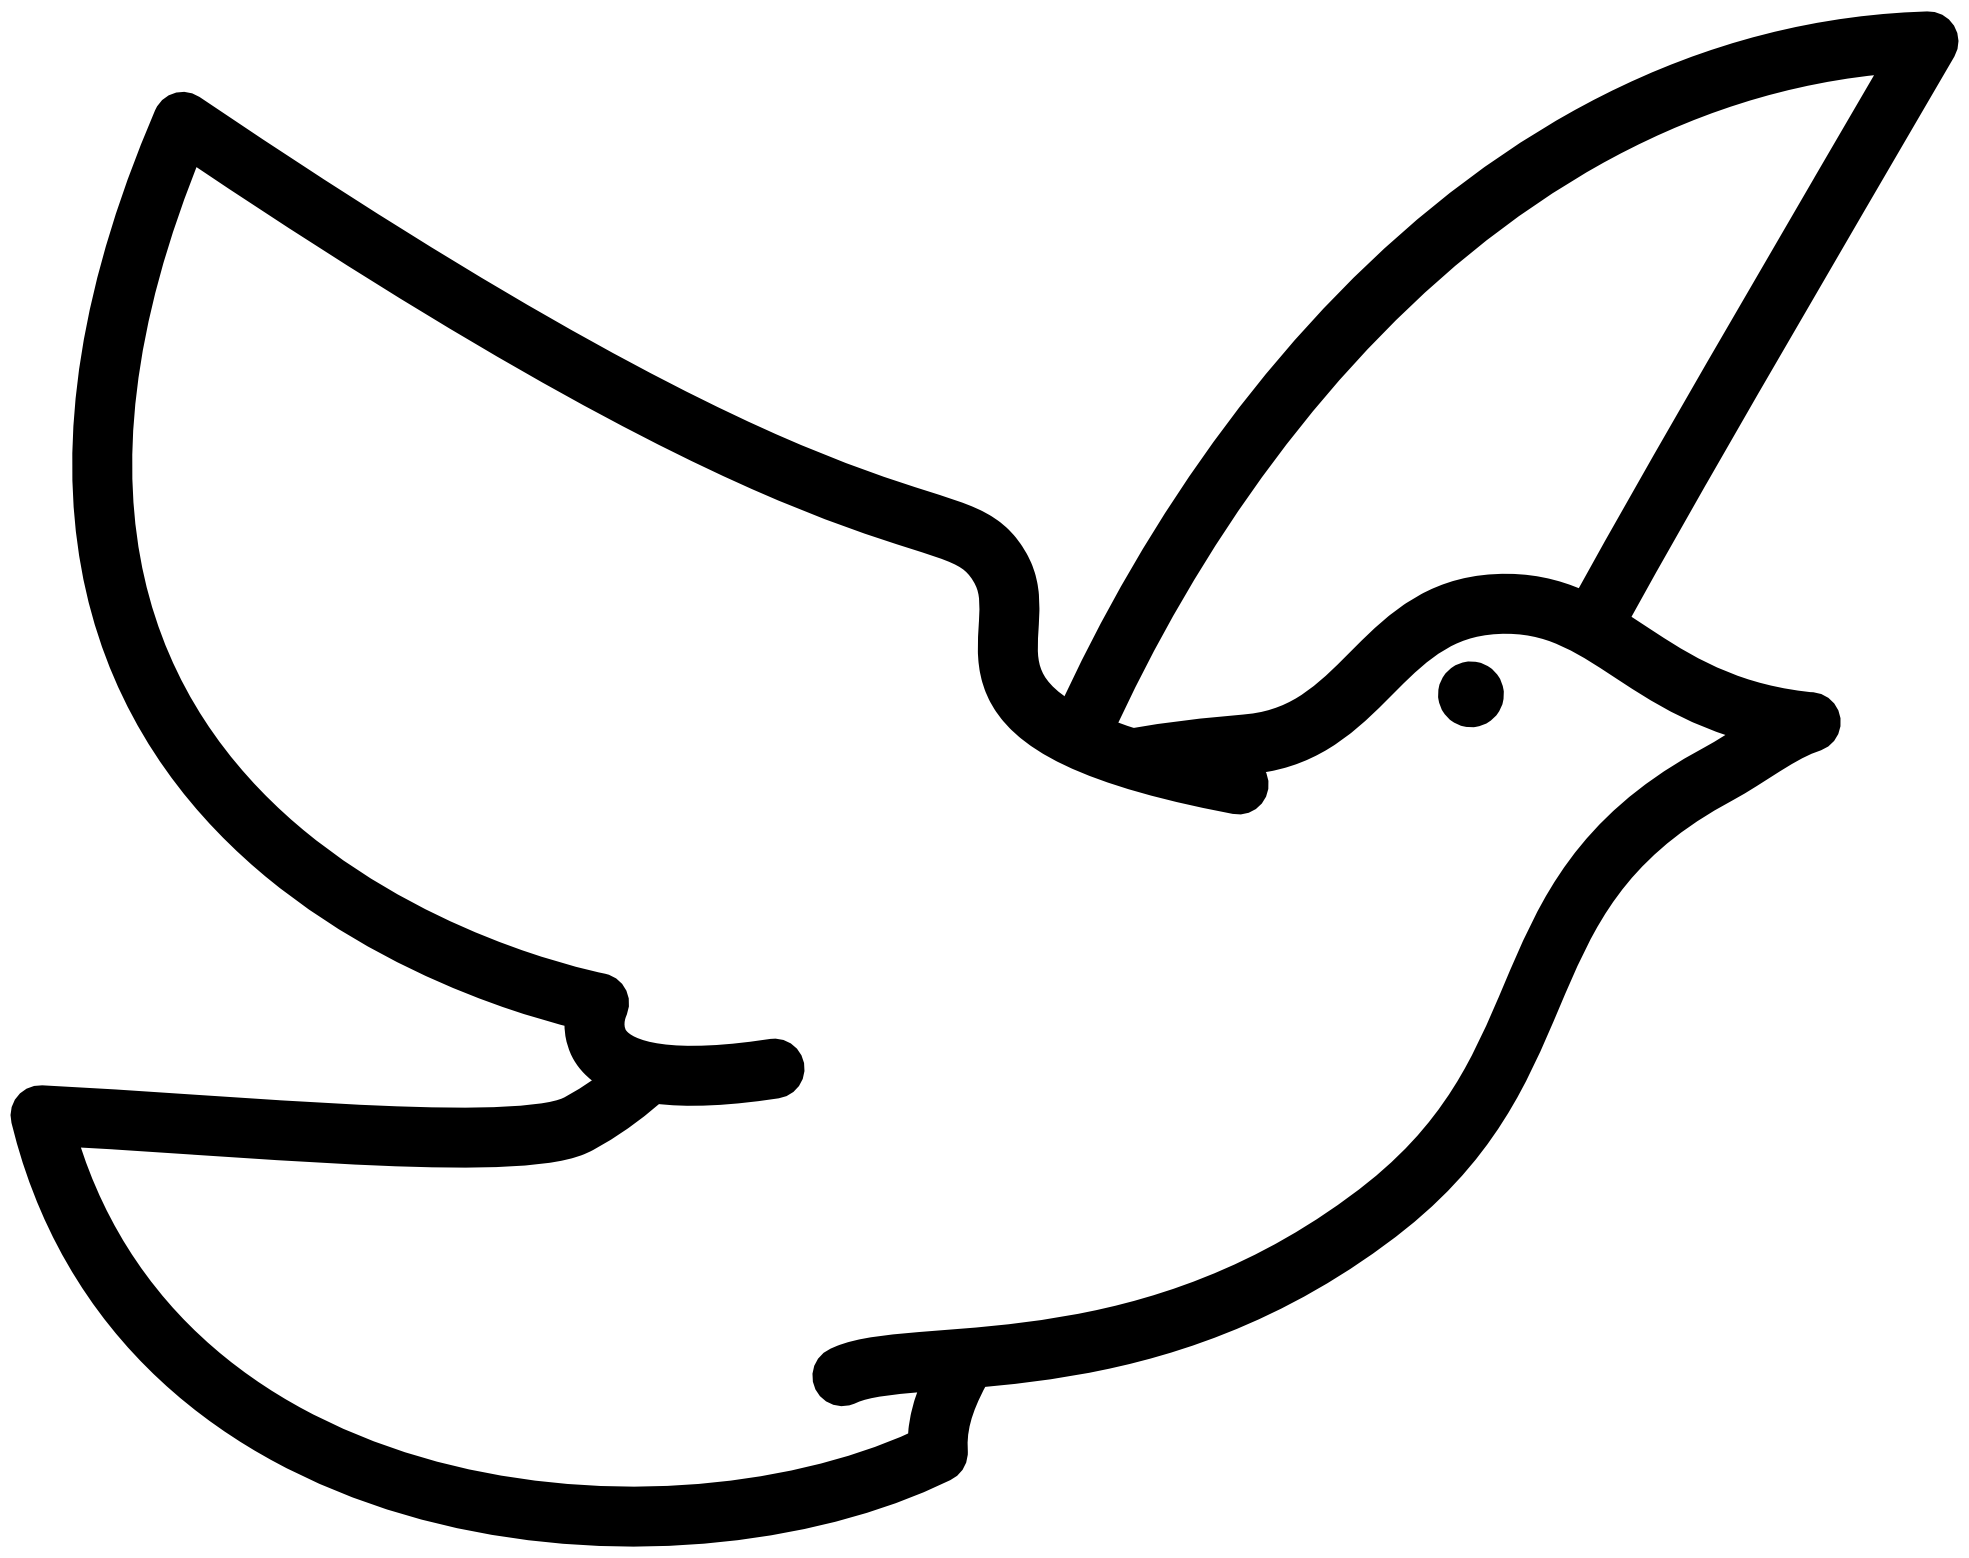 Bird clipart black and white free clipart images - Cliparting.com